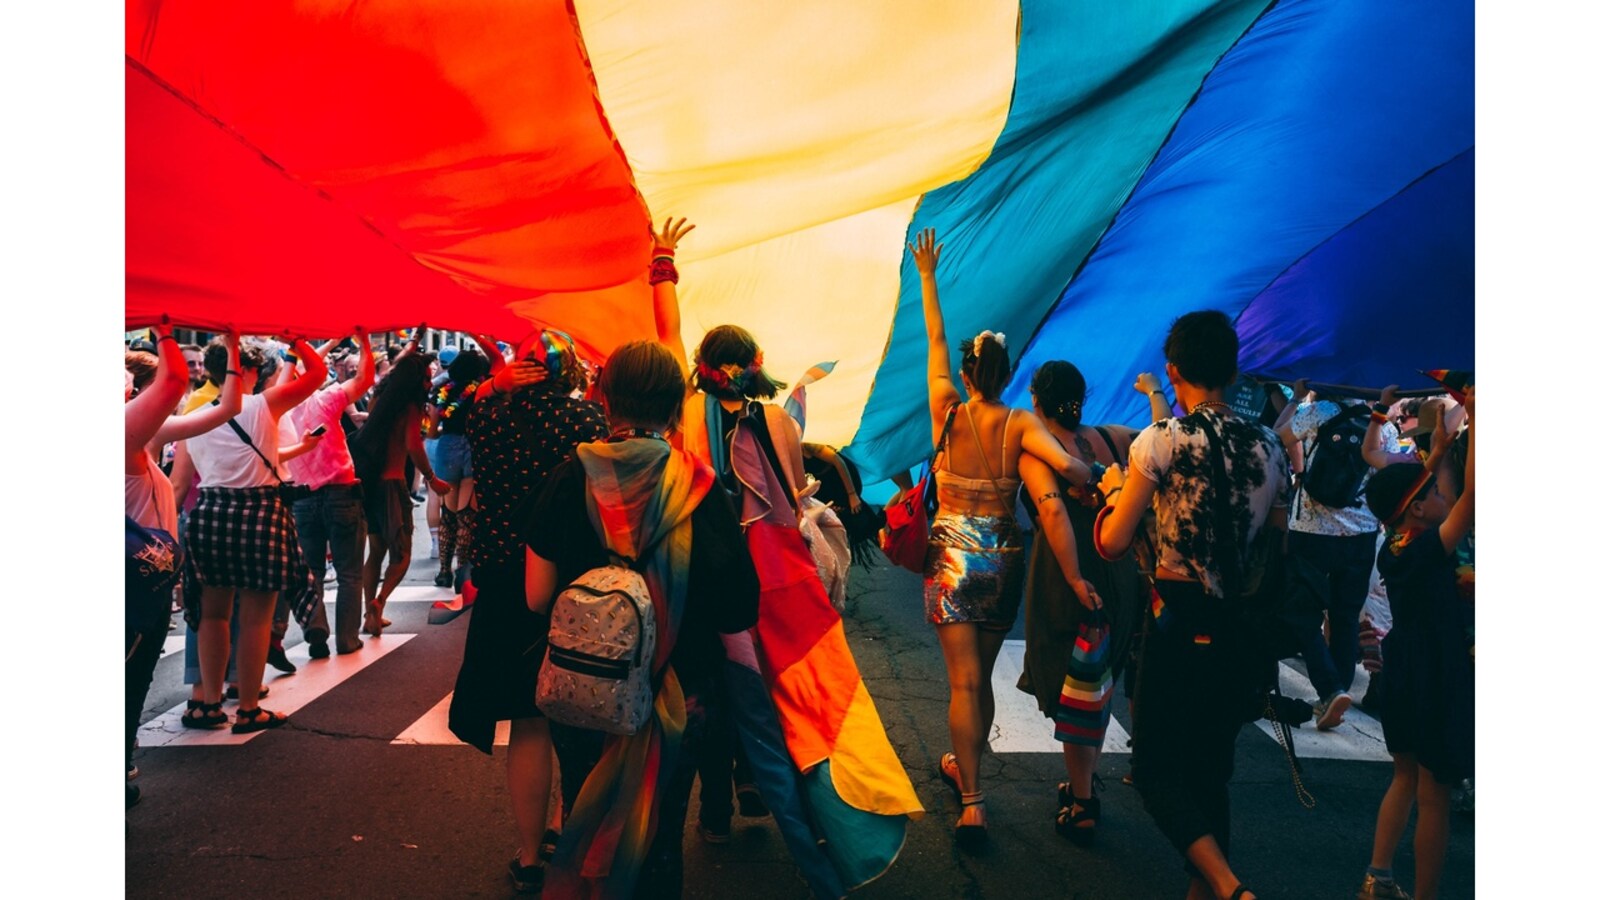 Russian authorities ask Supreme Court to recognize LGBT movement as  'extremist